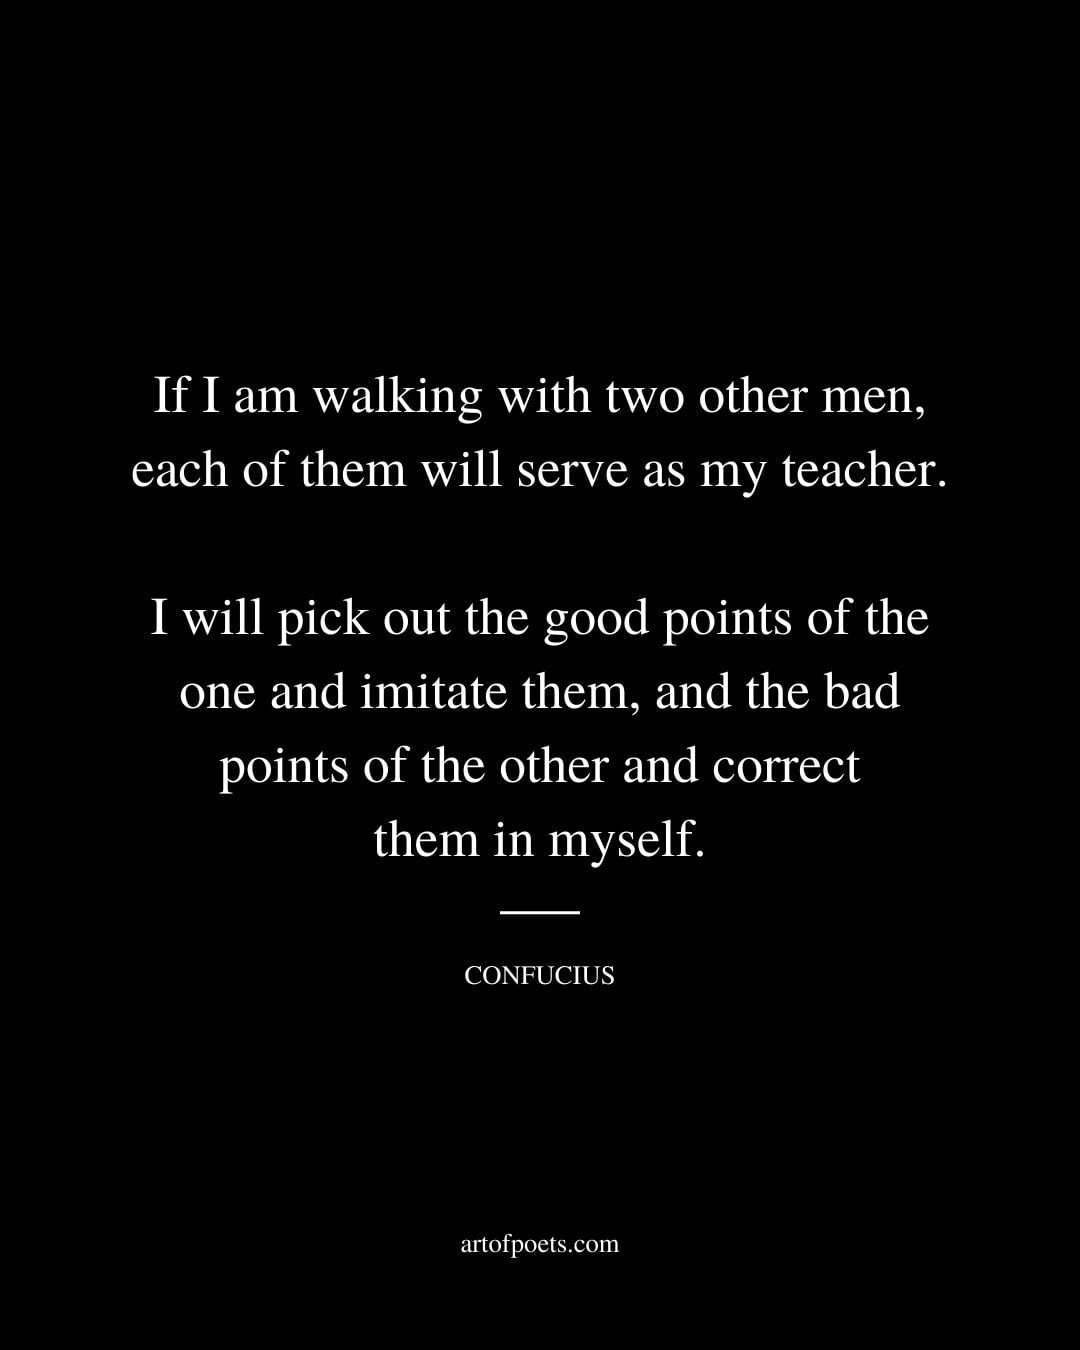 If I am walking with two other men each of them will serve as my teacher